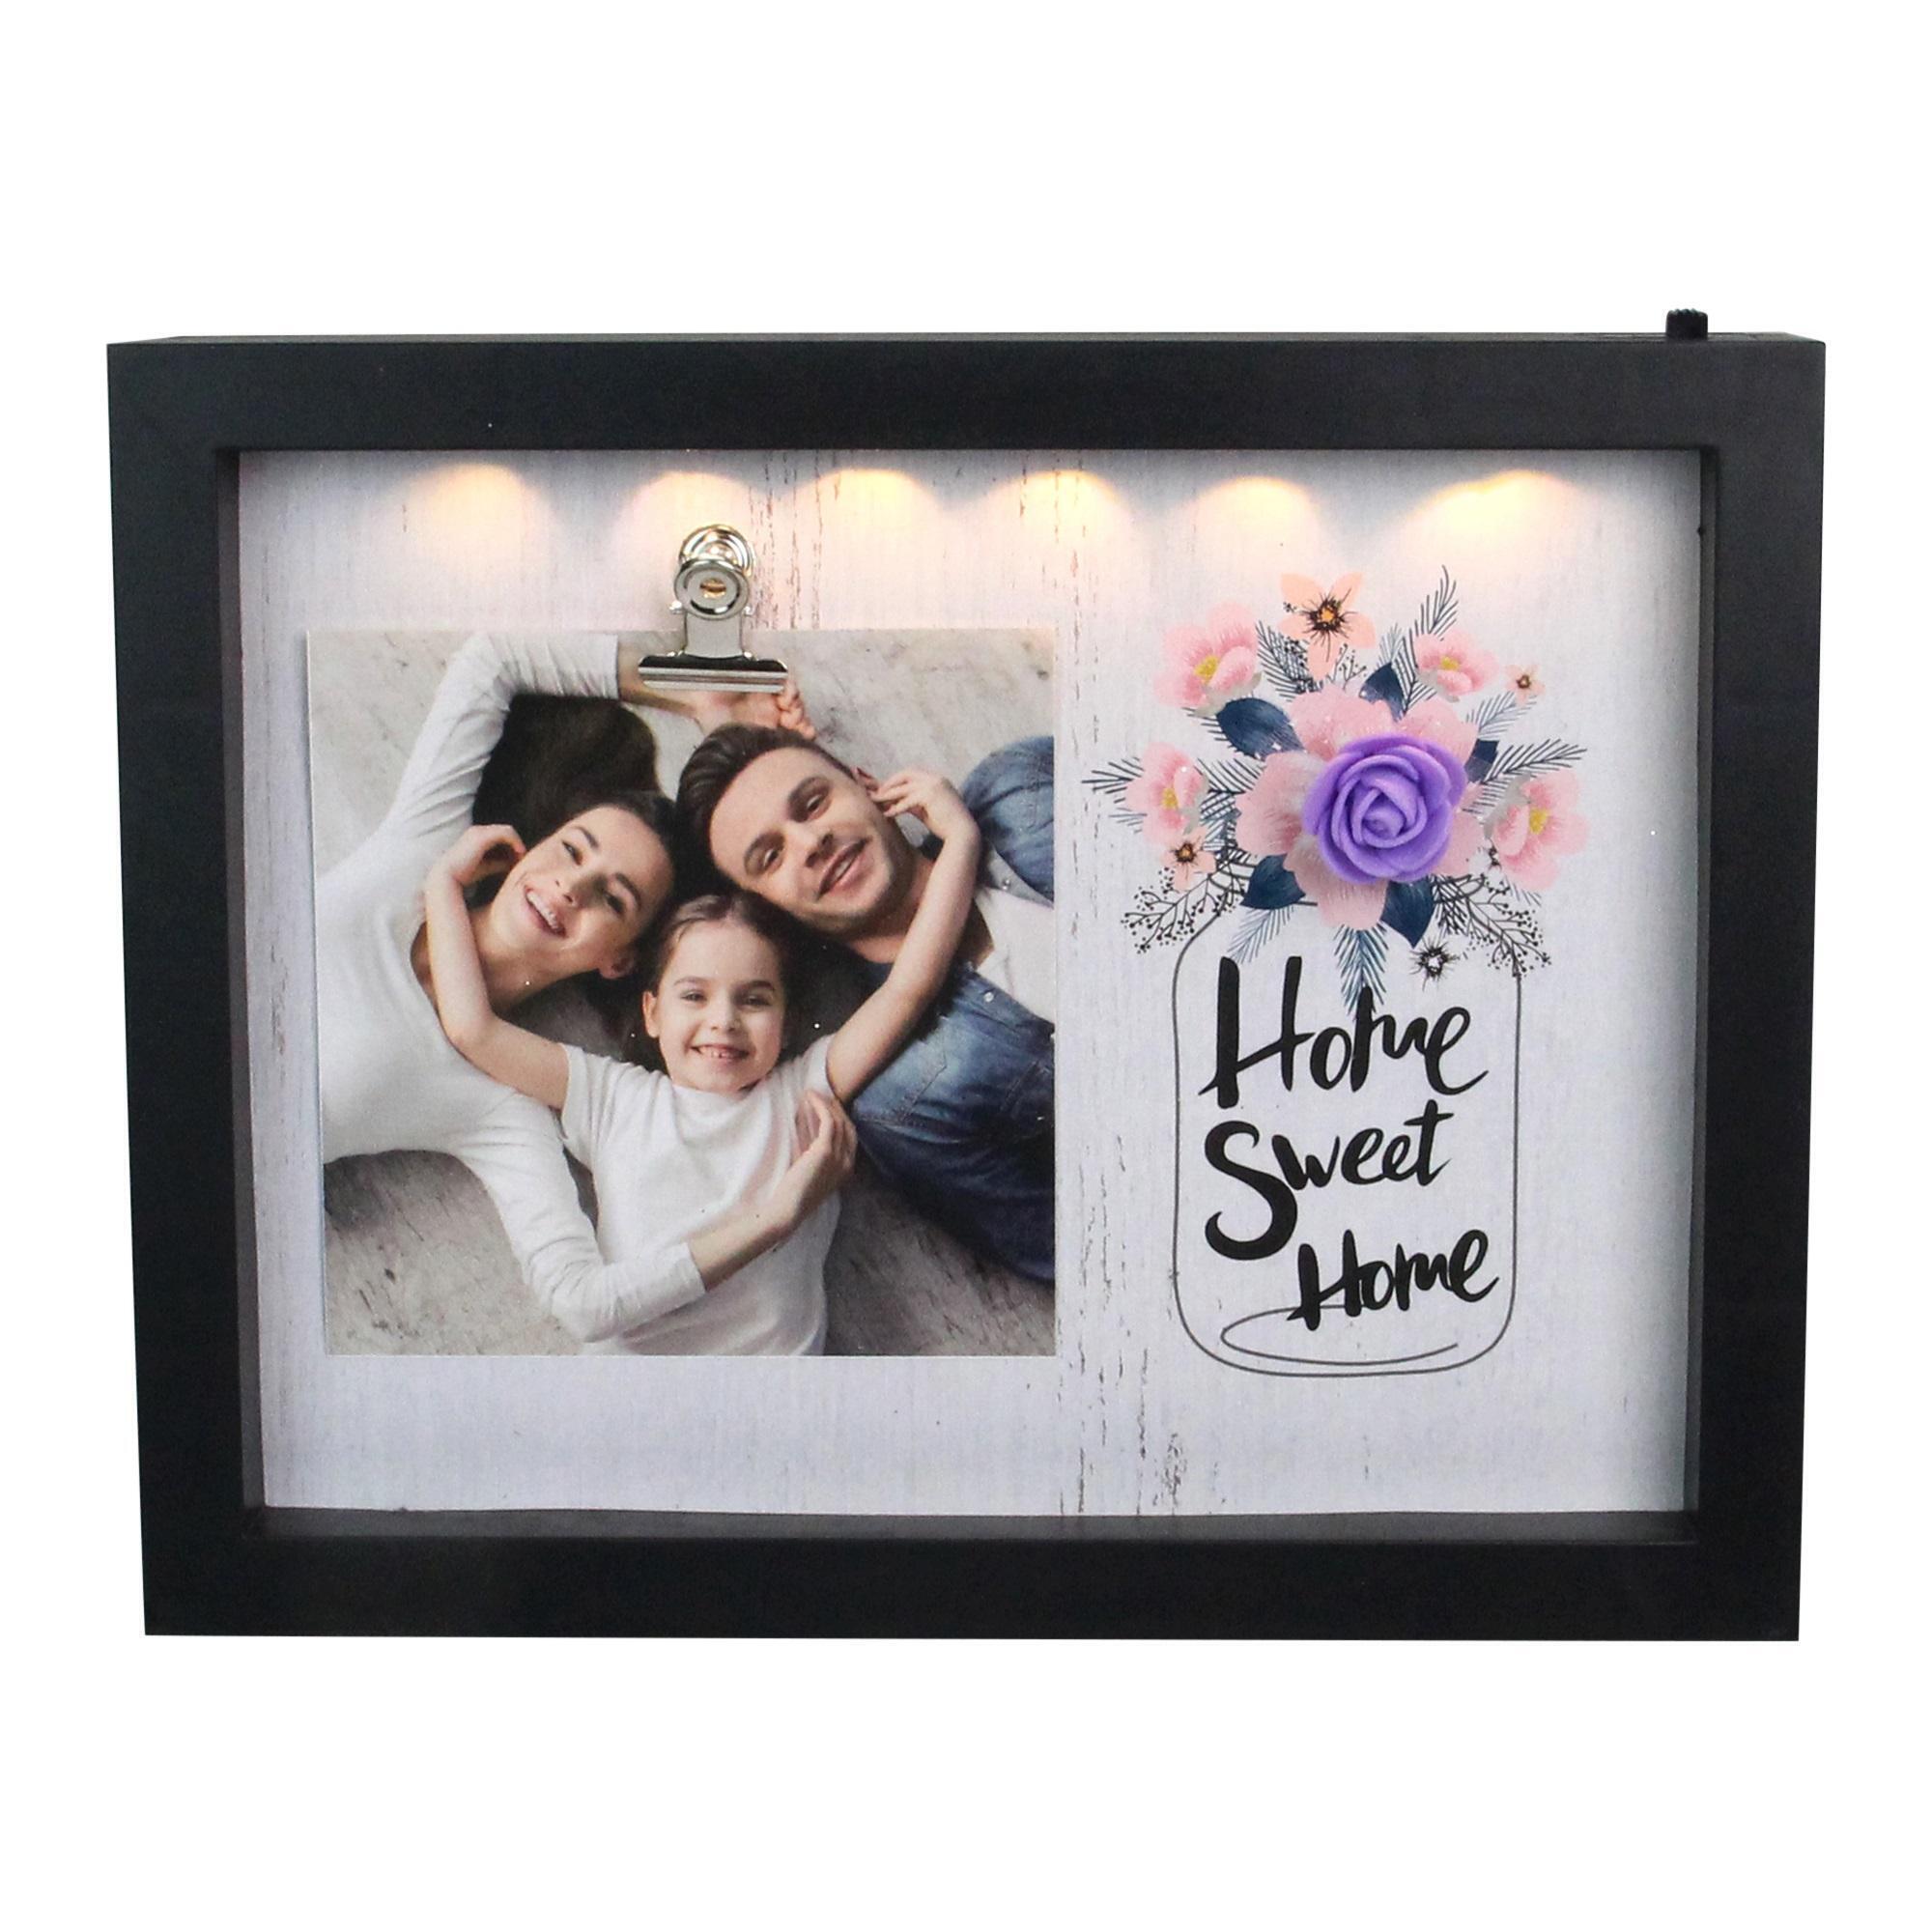 LED Lighted Home Sweet Home Picture Frame with Clip - 4